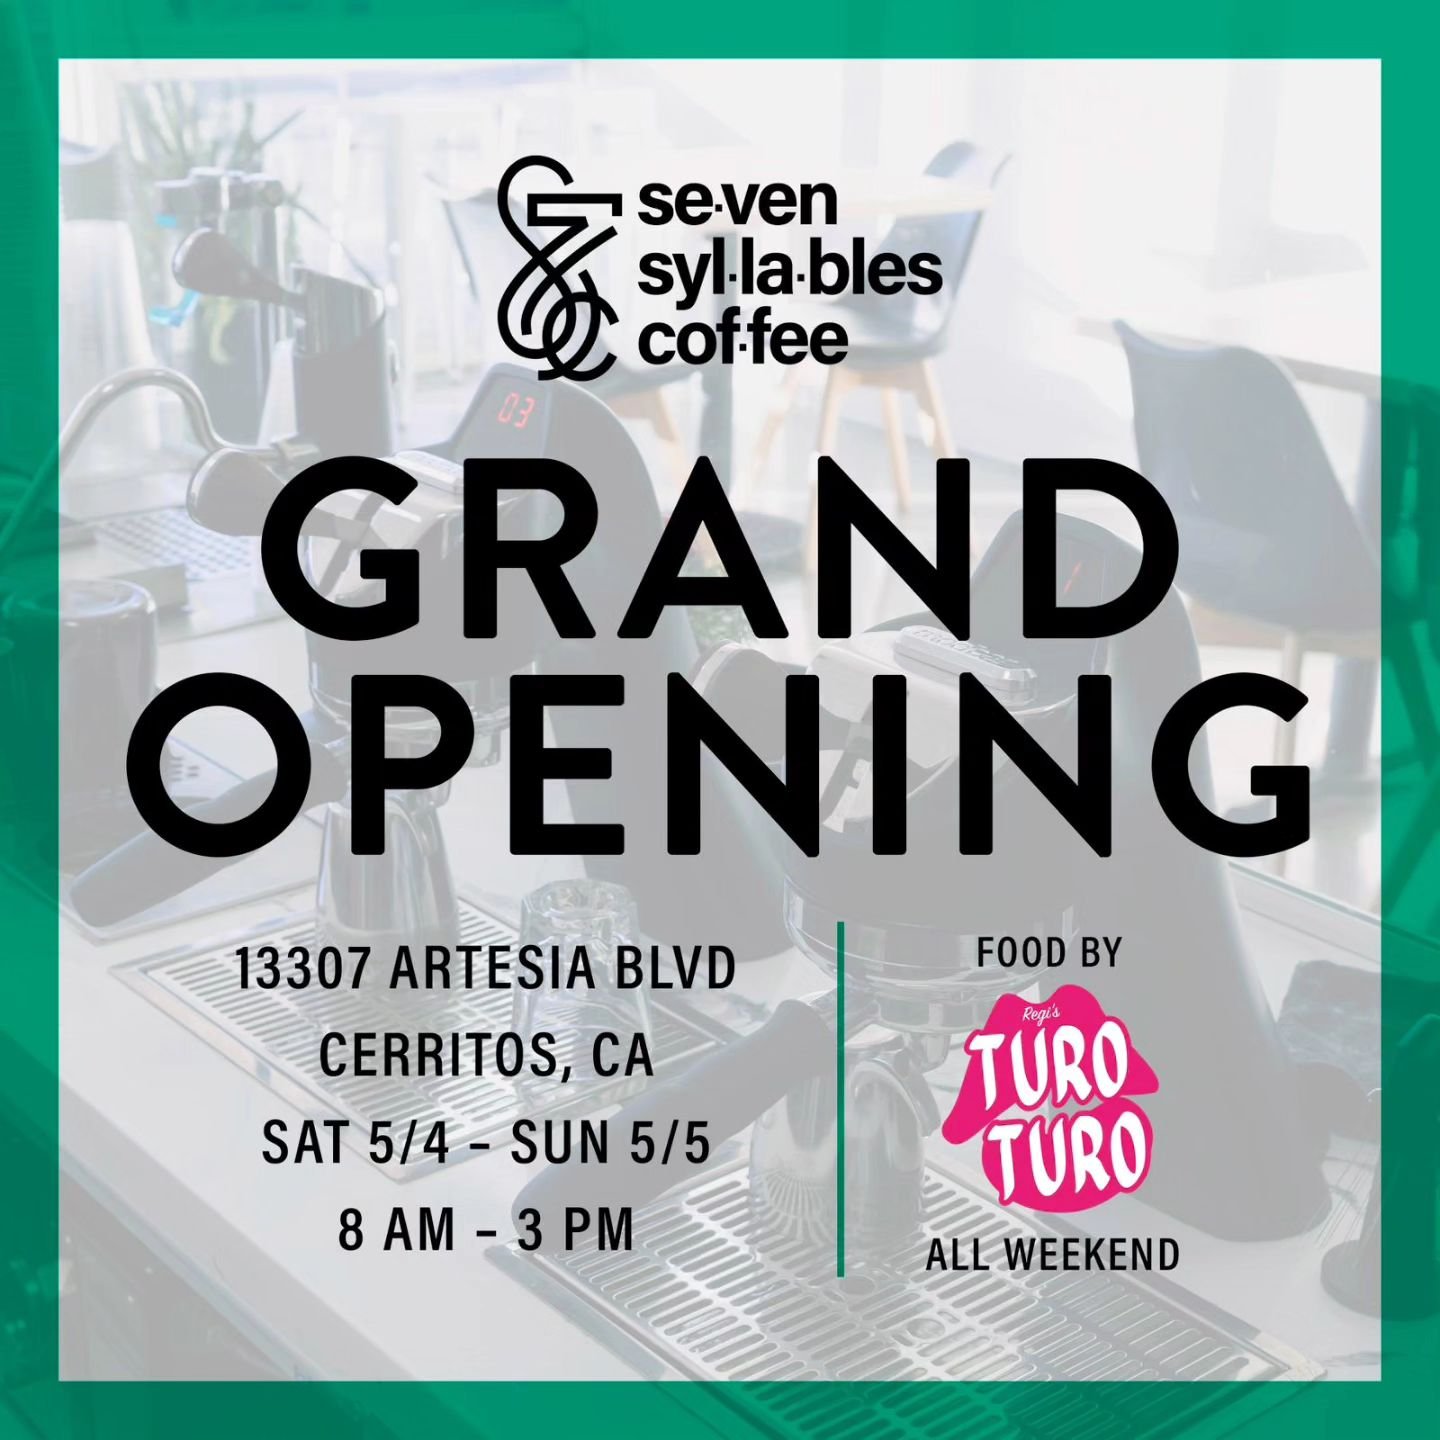 Okay, so this is long overdue...but we're finally doing a ribbon cutting ceremony. I mean we've been here a little over two years now. It's been a long, rough road. To be honest, it doesn't feel like a grand opening. It feels like we've always been h